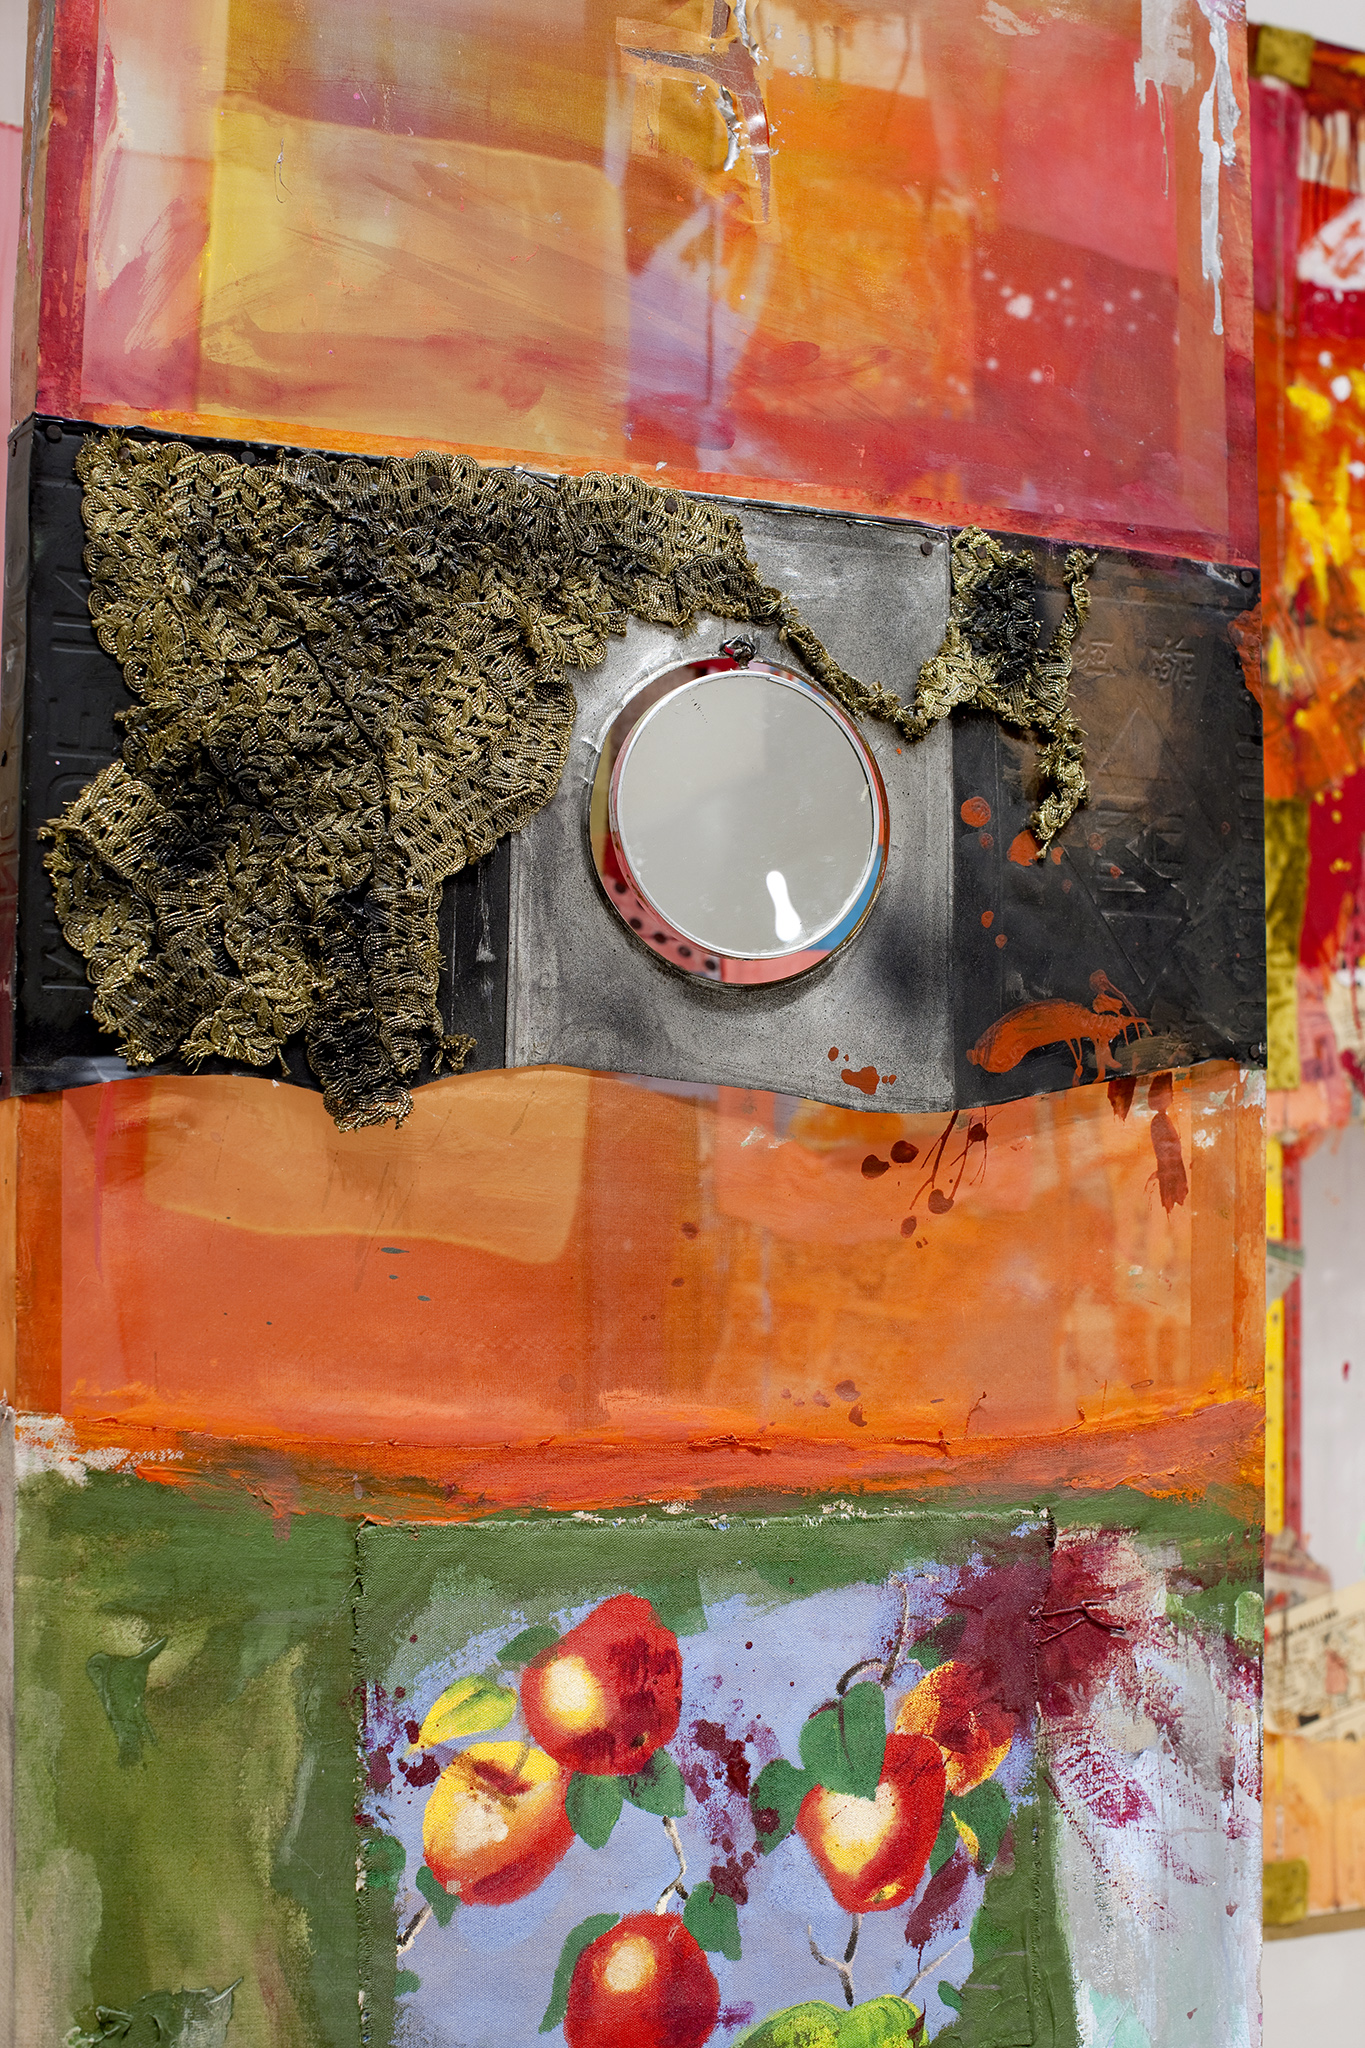 Robert Rauschenberg Décor for Minutiae 1954/1976 oil, paper, fabric, newsprint, wood, metal, and plastic with mirror and string, on wood 84 ½ x 81 x 30 ½ in. (214.63 x 205 x 77.47 cm) Walker Art Center, Merce Cunningham Dance Company Collection, Gift of Jay F. Ecklund, the Barnett and Annalee Newman Foundation, Agnes Gund, Russell Cowles and Josine Peters, the Hayes Fund of HRK Foundation, Dorothy Lichtenstein, MAHADH Fund of HRK Foundation, Goodale Family Foundation, Marion Stroud Swingle, David Teiger, Kathleen Fluegel, Barbara G. Pine, and the T. B. Walker Acquisition Fund, 2011.